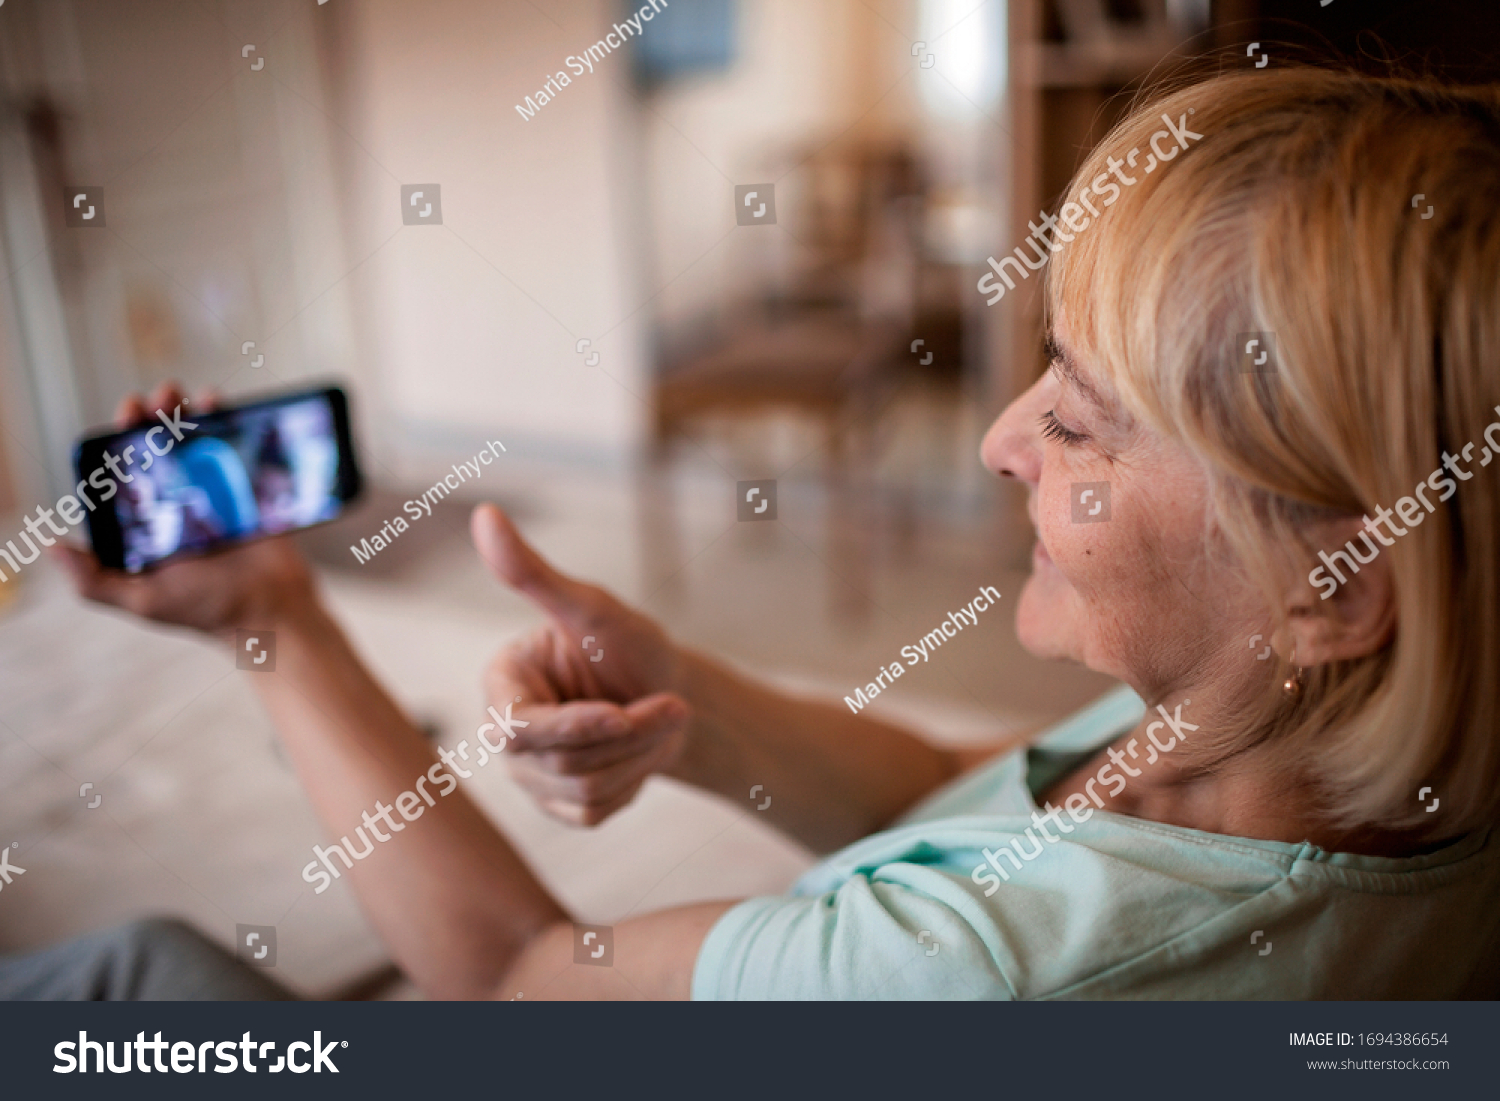 A senior woman talking with her grandchild within video chat via smartphone, digital conversation, life in quarantine time, self-isolation #1694386654